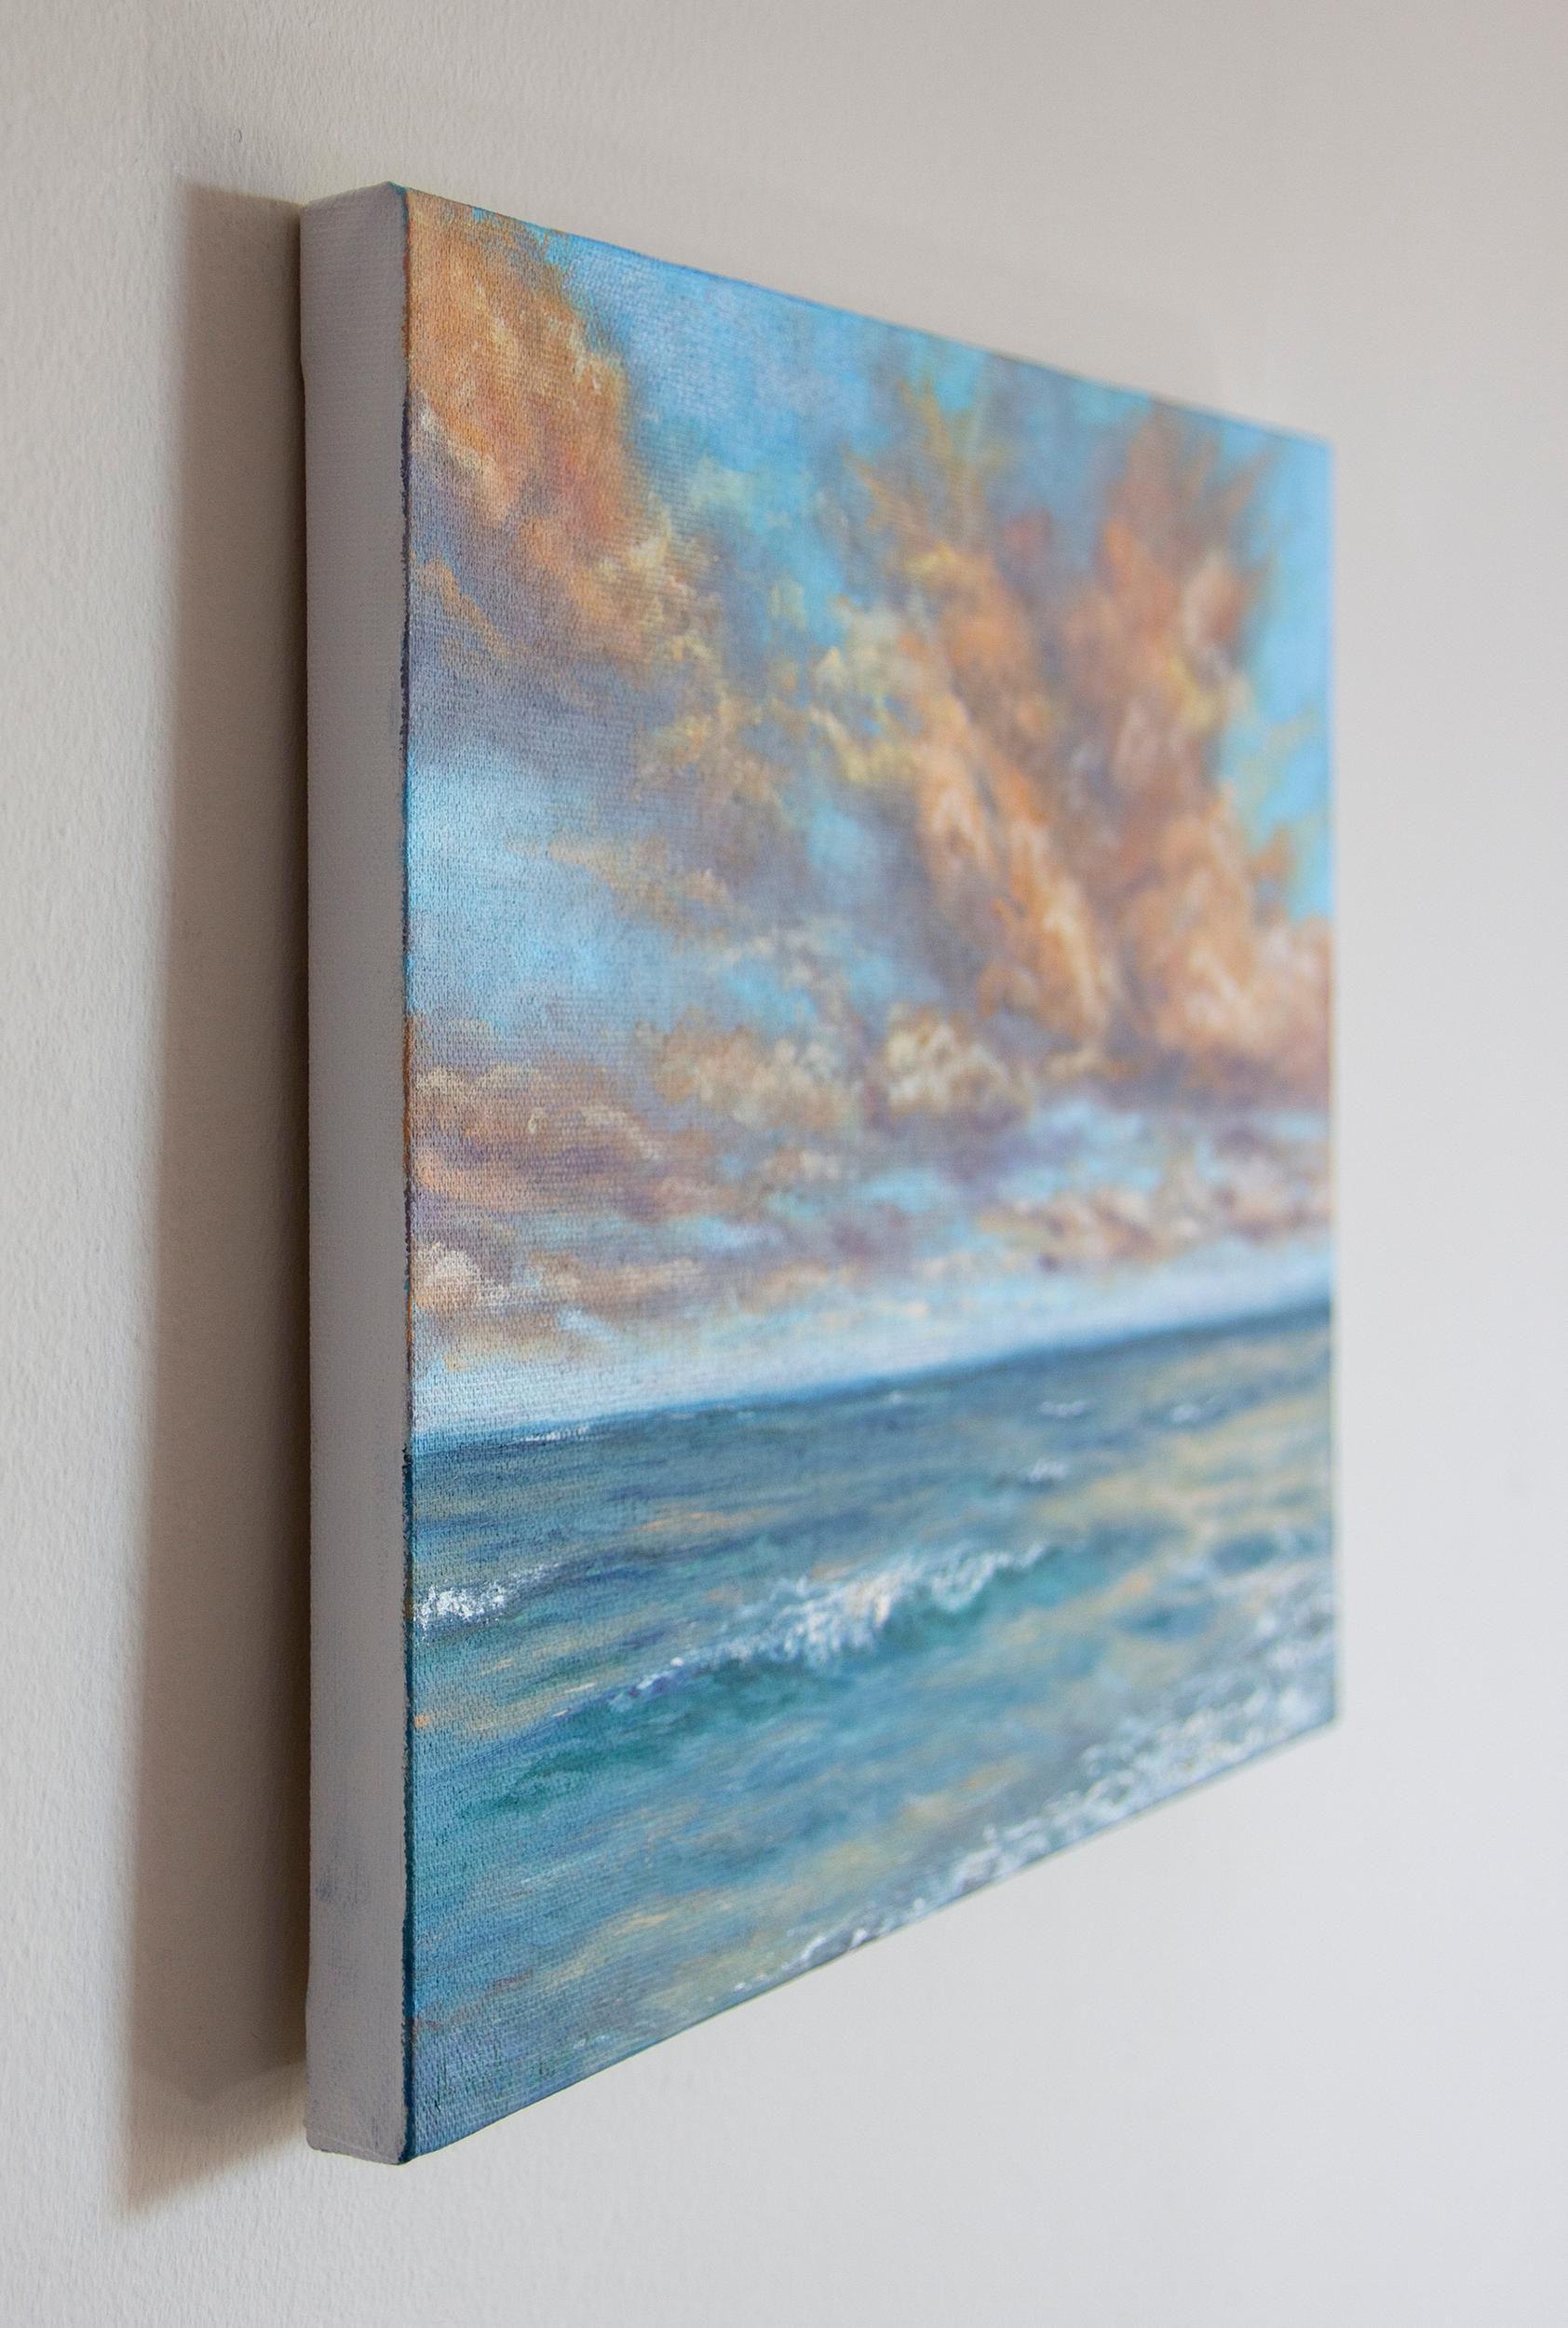 <p>Artist Comments<br />Artist Olena Nabilsky loves painting fleeting moments in nature. She captures the fluffy, silvery pink clouds drifting over a calm blue ocean. The water mirrors the soft hues from above, embracing light and delicate shades